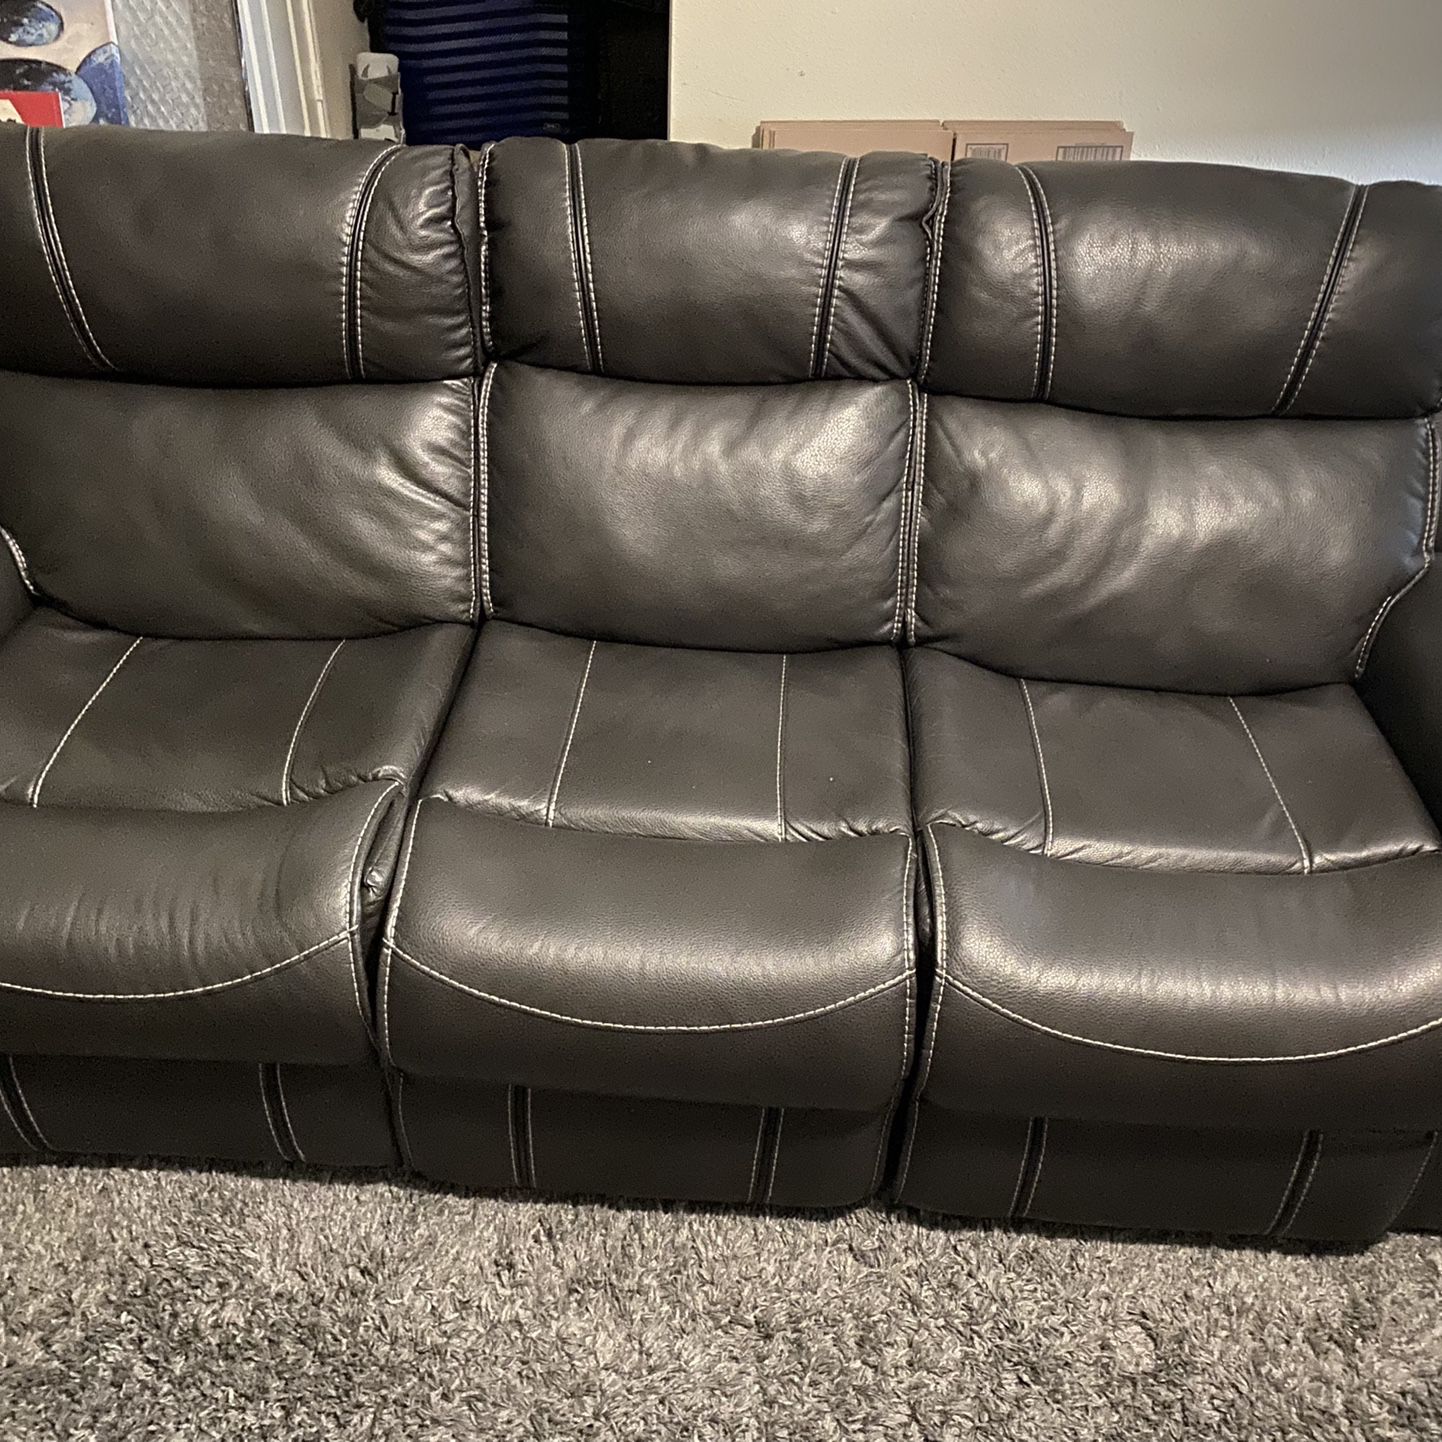 Leather Love seat And couch 